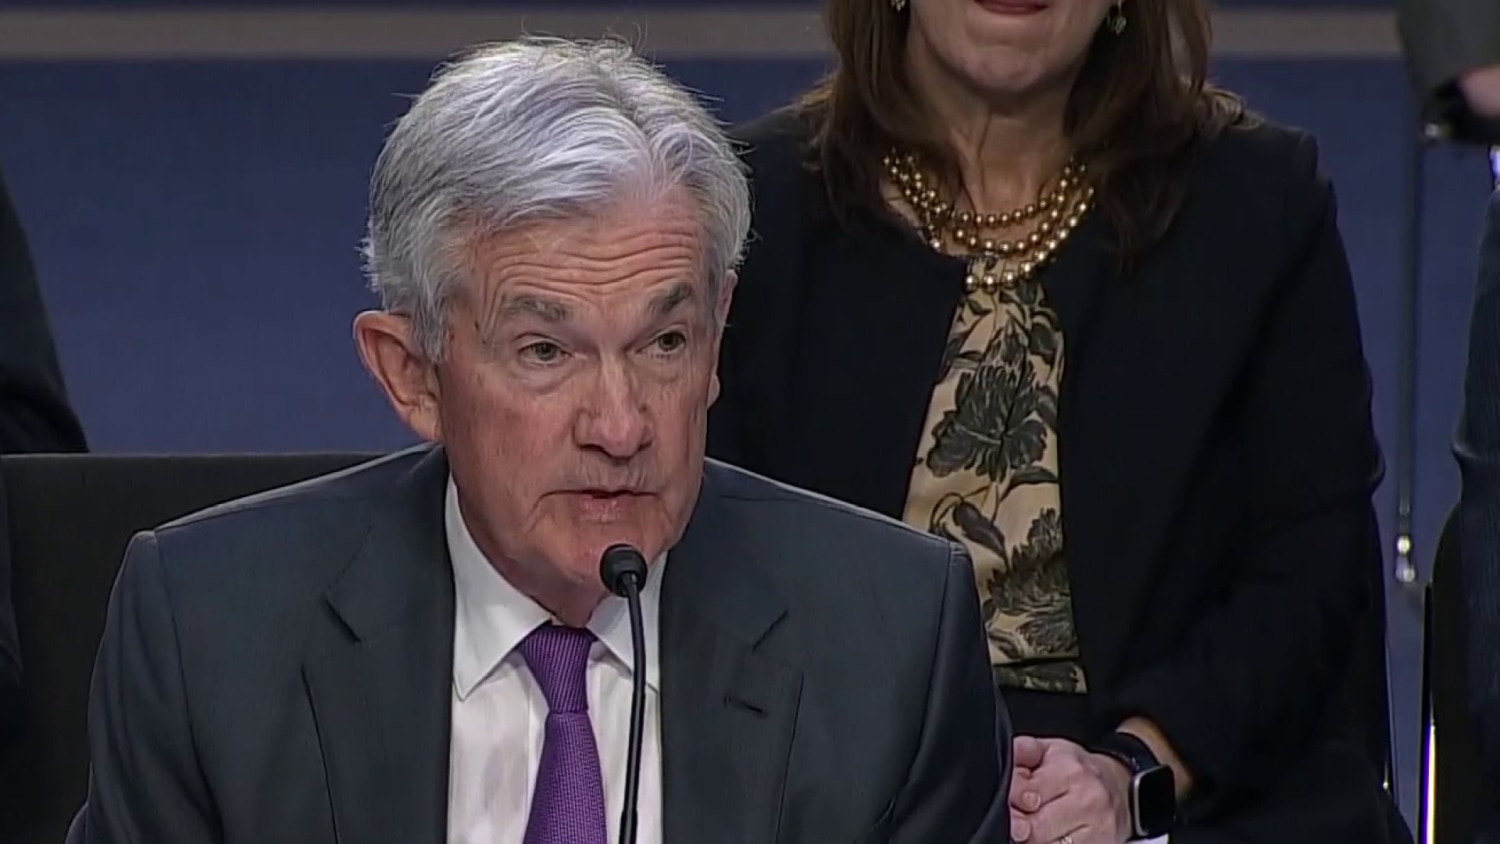 Powell: There's more levels to go to